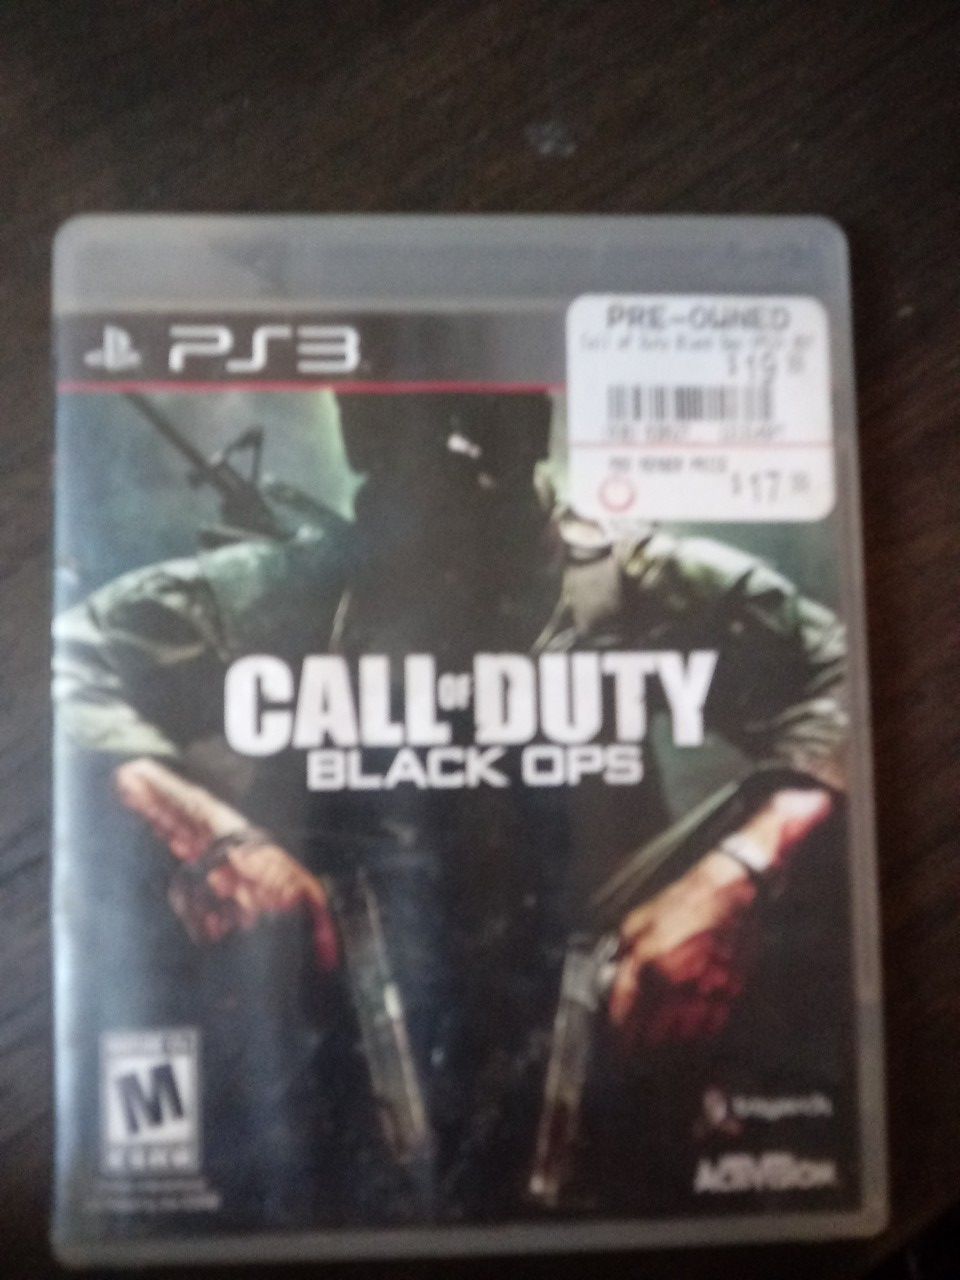 Call of duty black ops ps3 game